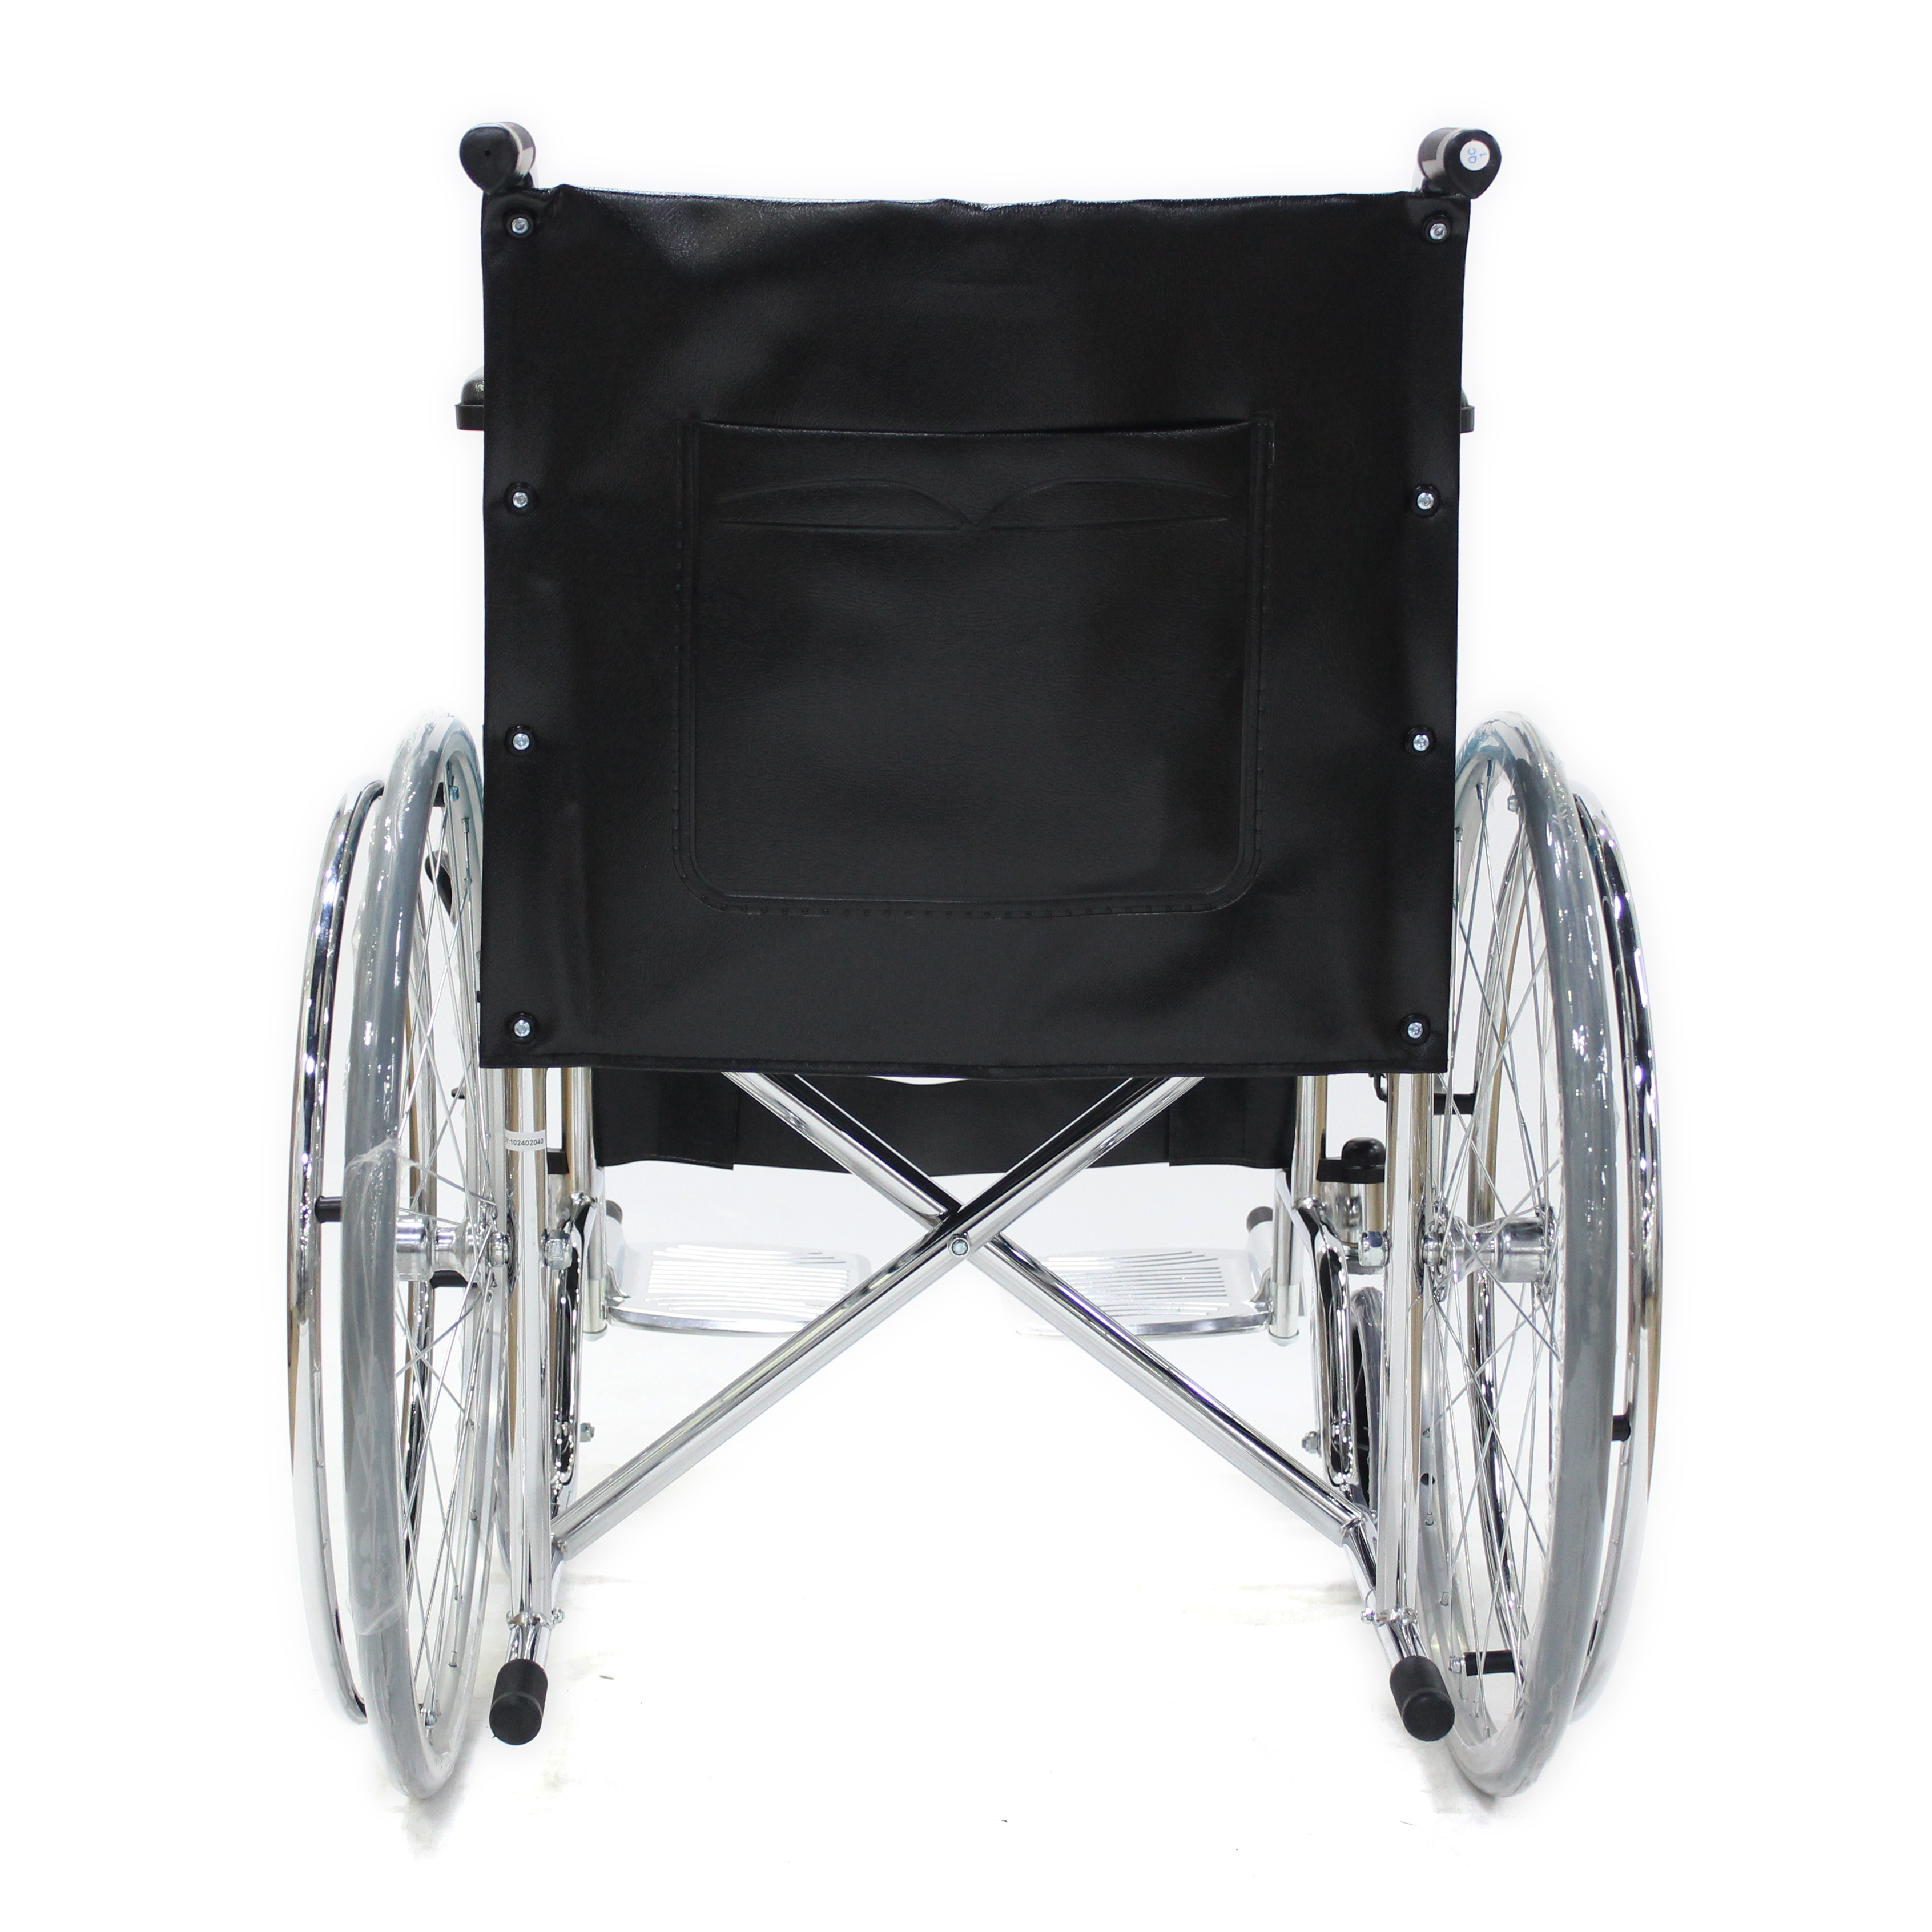 best selling products 2022 cheap products aluminum steel disabled adult manual wheelchairs price